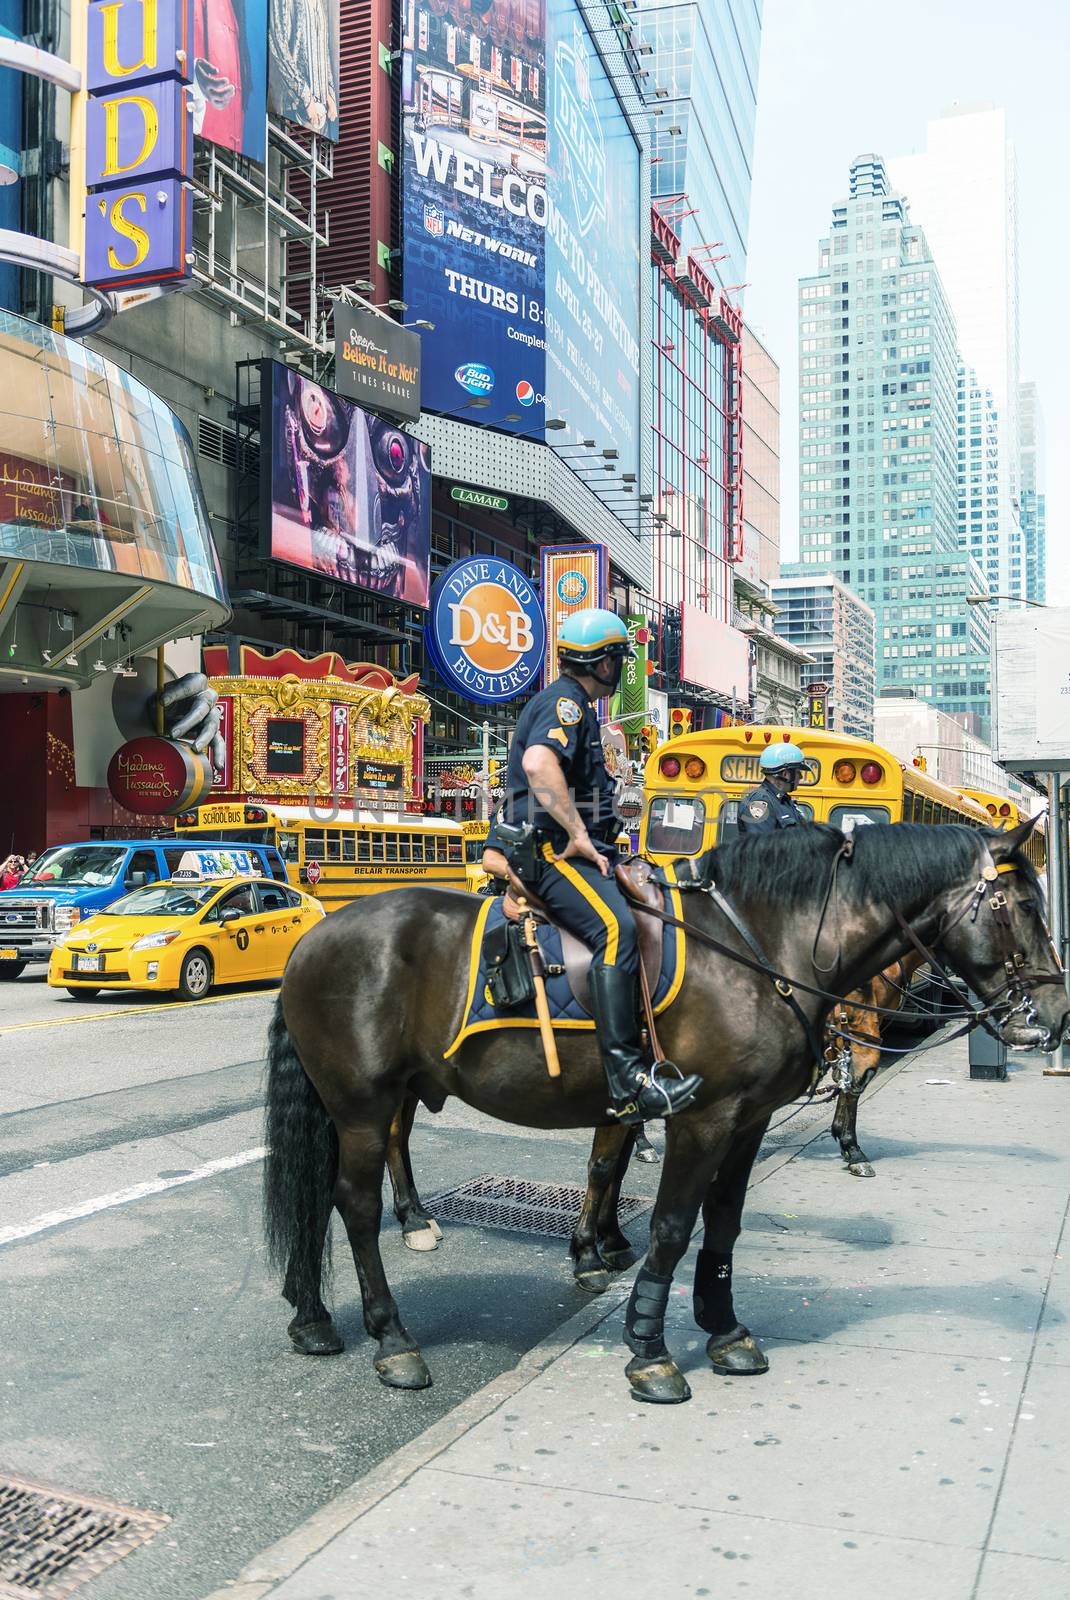 NEW YORK, USA - JUNE 11: Police officer rides his horse downtown in New York on the main street, Manhattan on June 11, 2013, New York, USA.